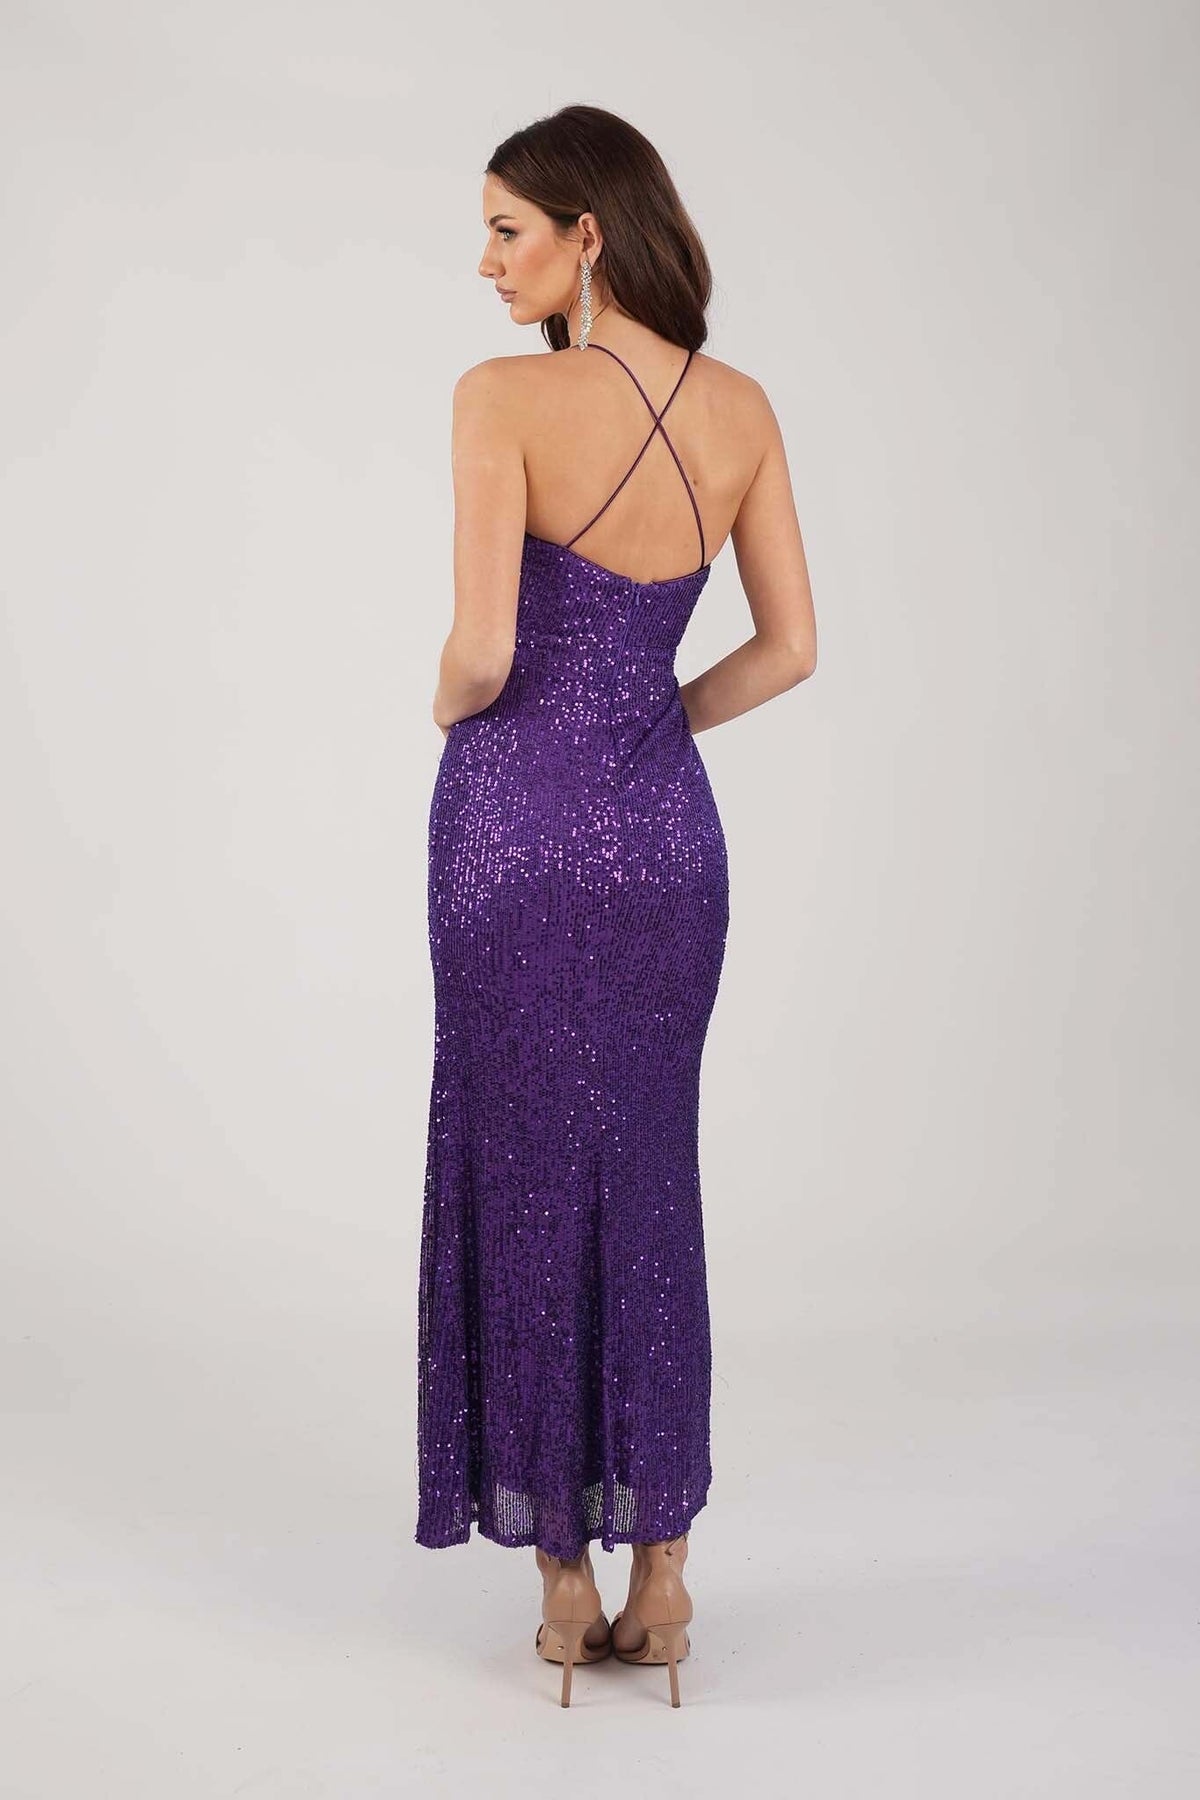 Crisscross Straps on Open Back Design of Purple Fitted Sequin Maxi Dress with V Neckline and Side Slit 